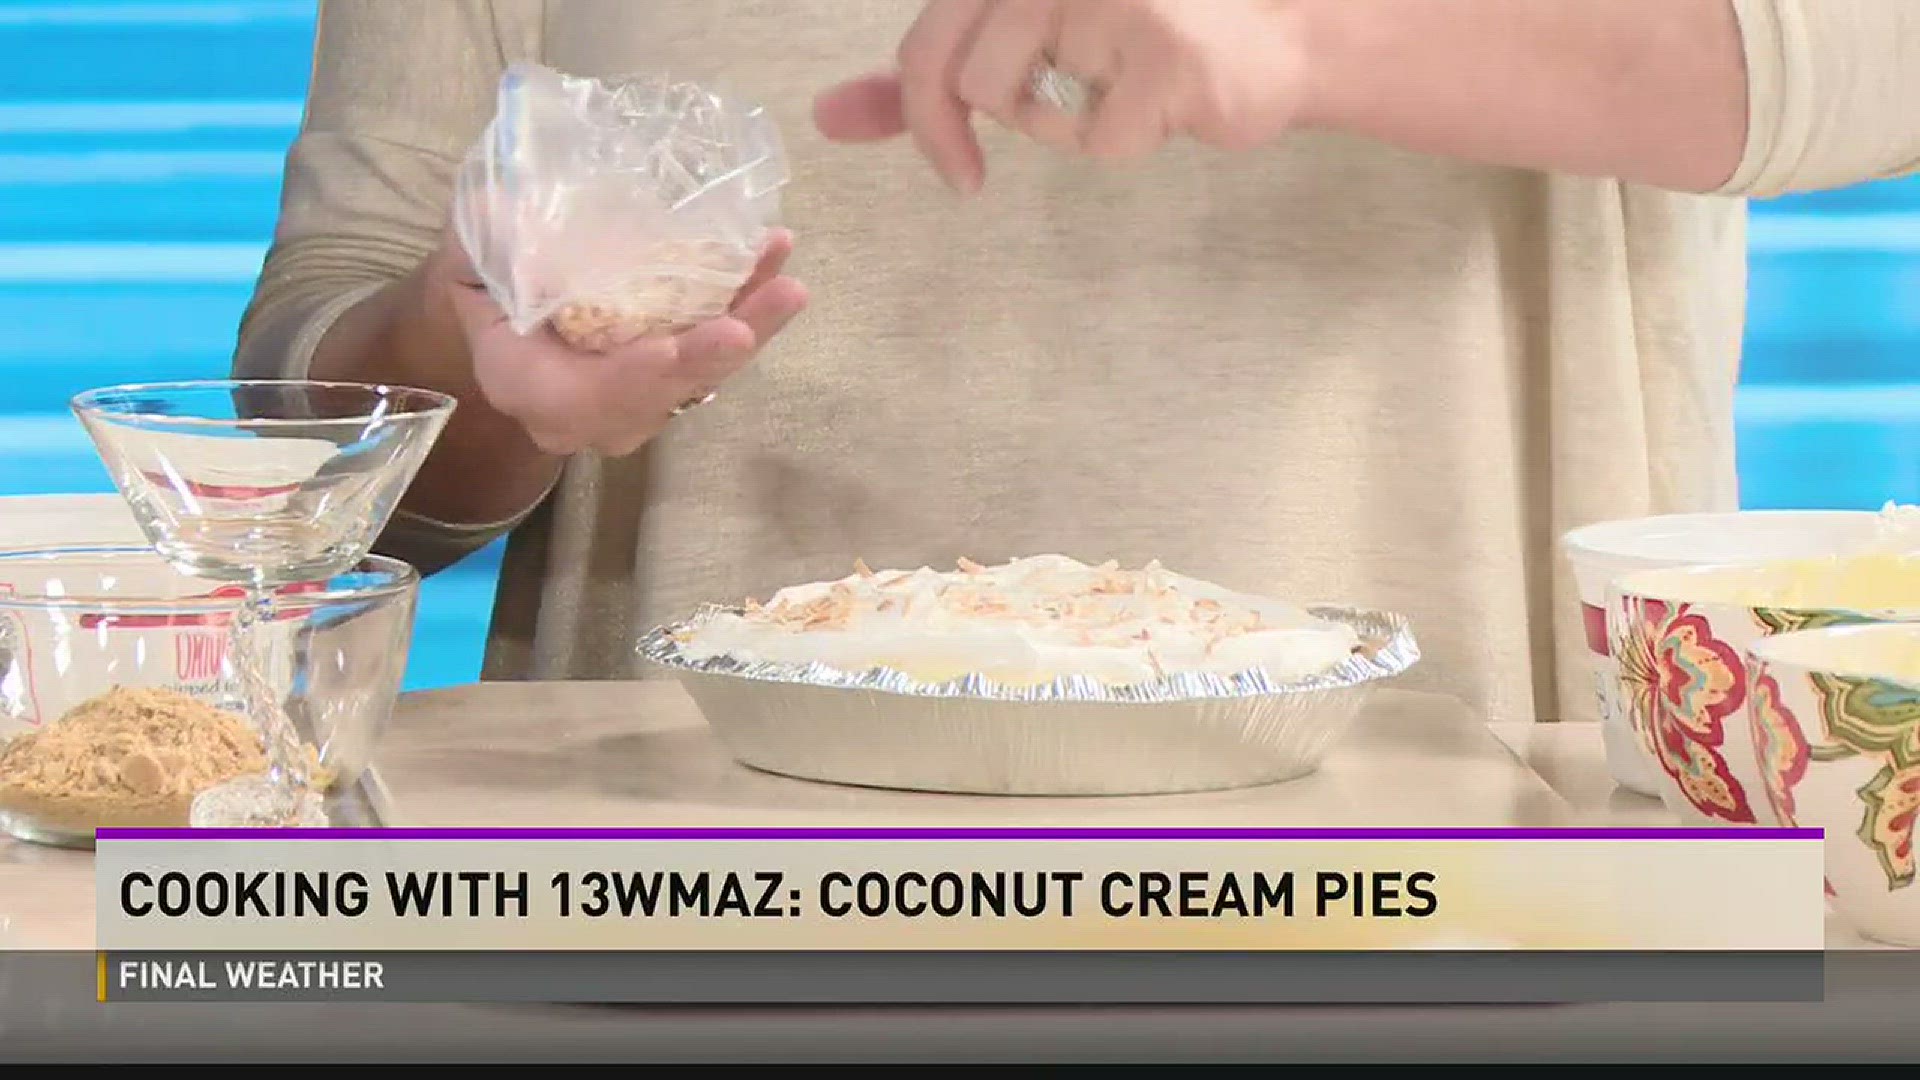 Cooking with 13WMAZ: Coconut Cream Pies